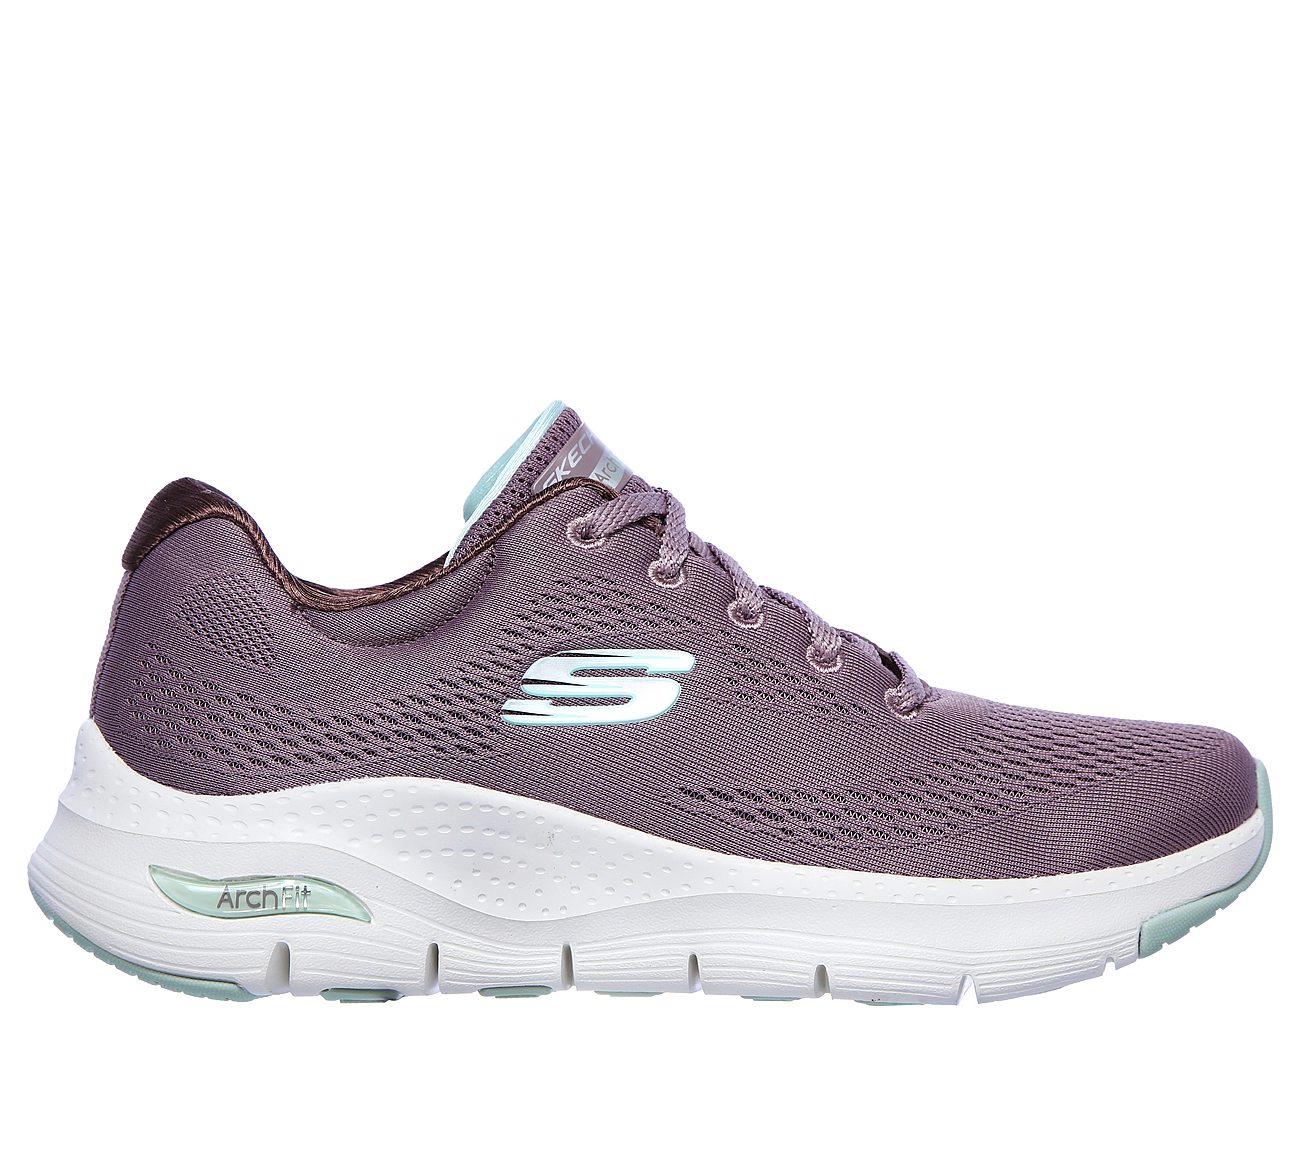 Buy SKECHERS Skechers Arch Fit - Sunny Outlook Skechers Arch Fit Shoes